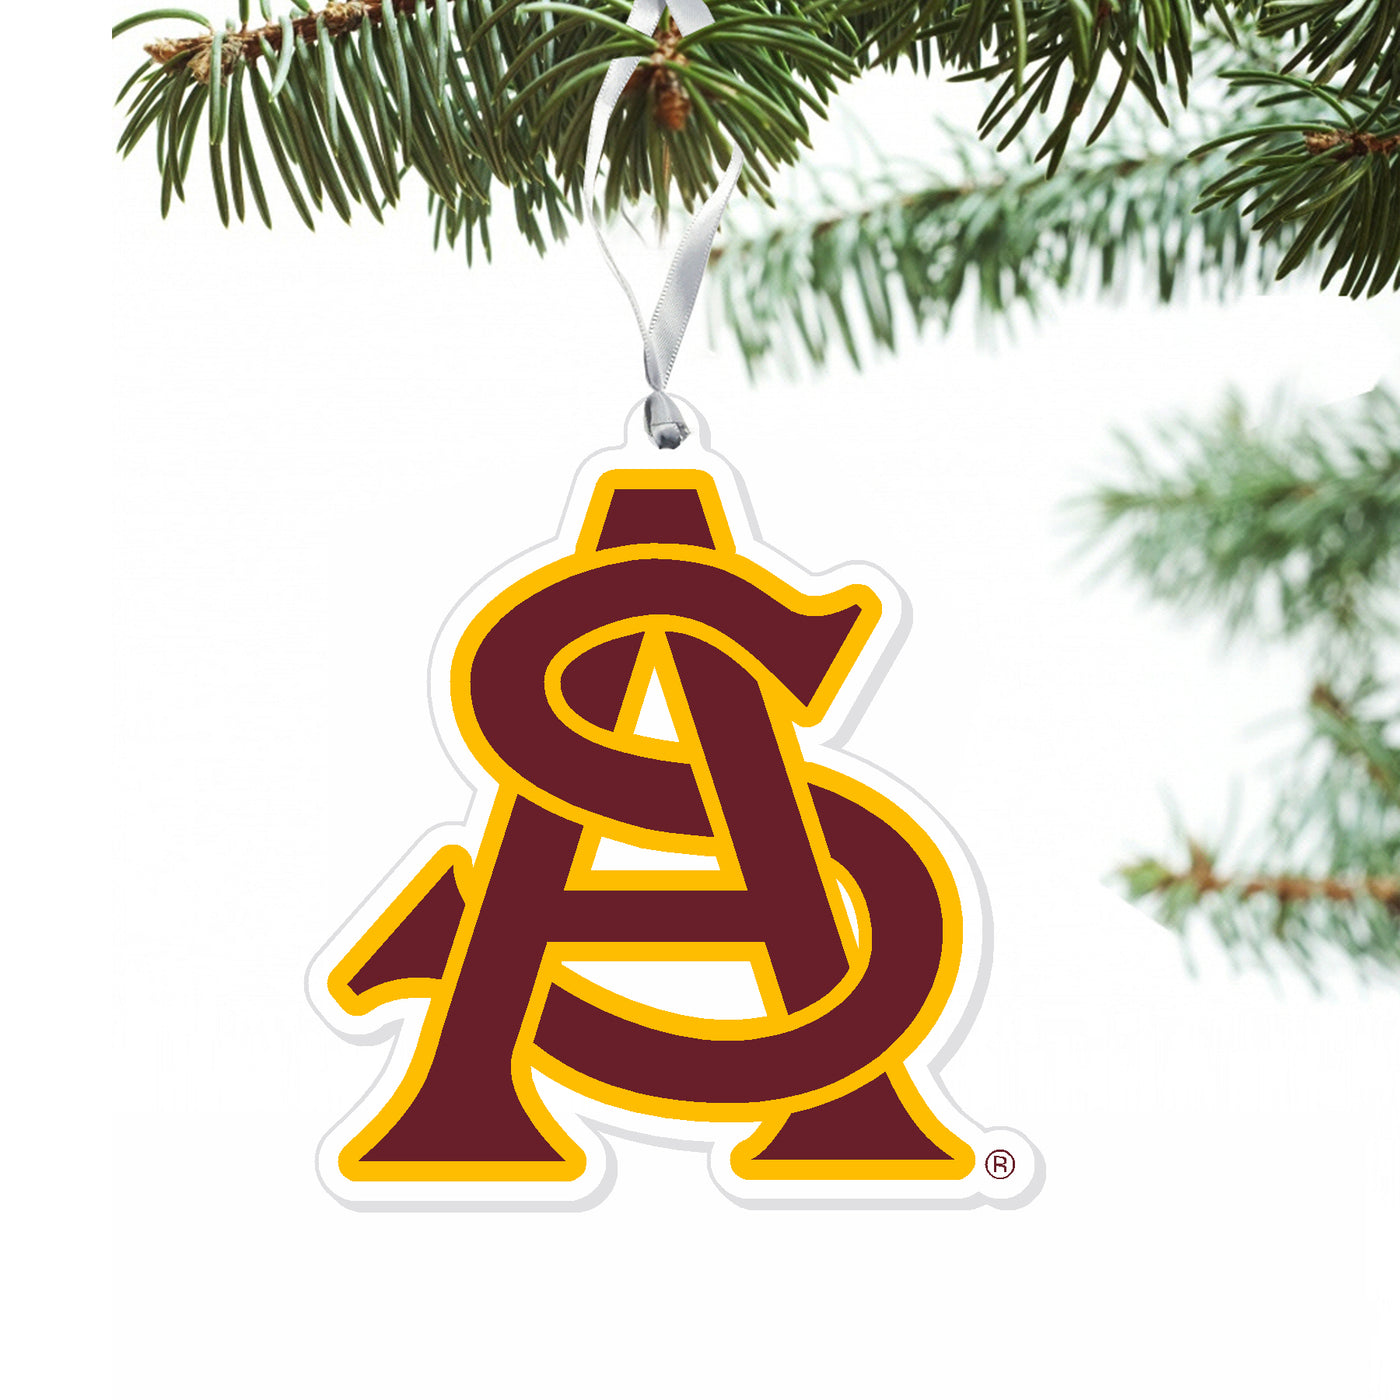 ASU gold and maroon acrylic ornament in the shape of the A&S interlocking logo. 